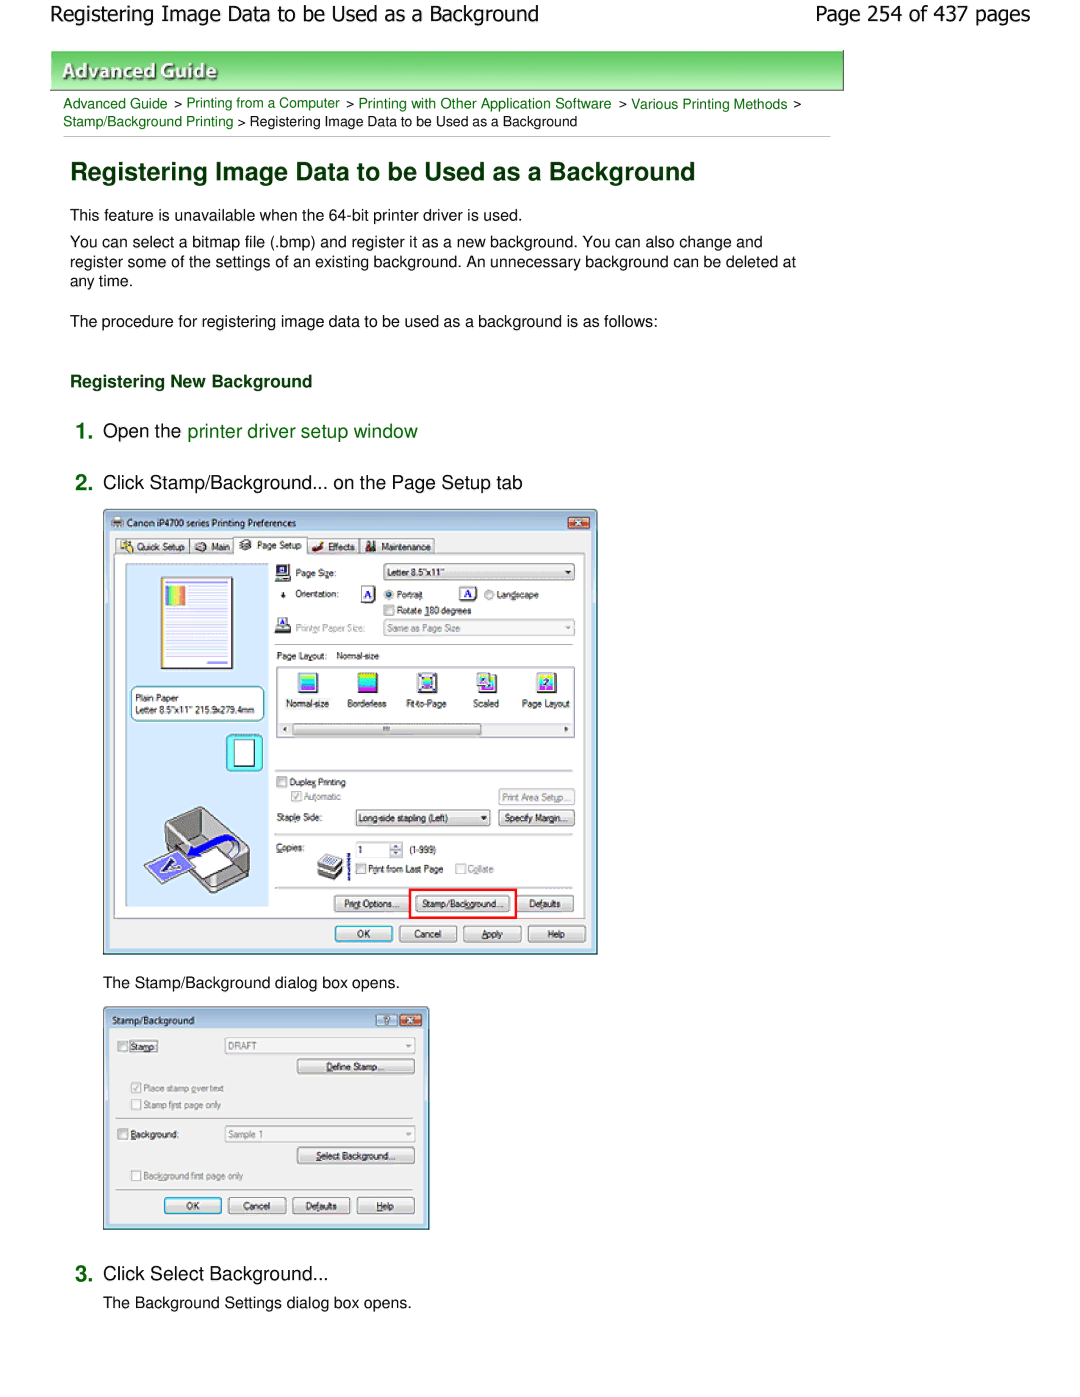 Canon iP4700 manual Registering Image Data to be Used as a Background, 254 of 437 pages, Click Select Background 